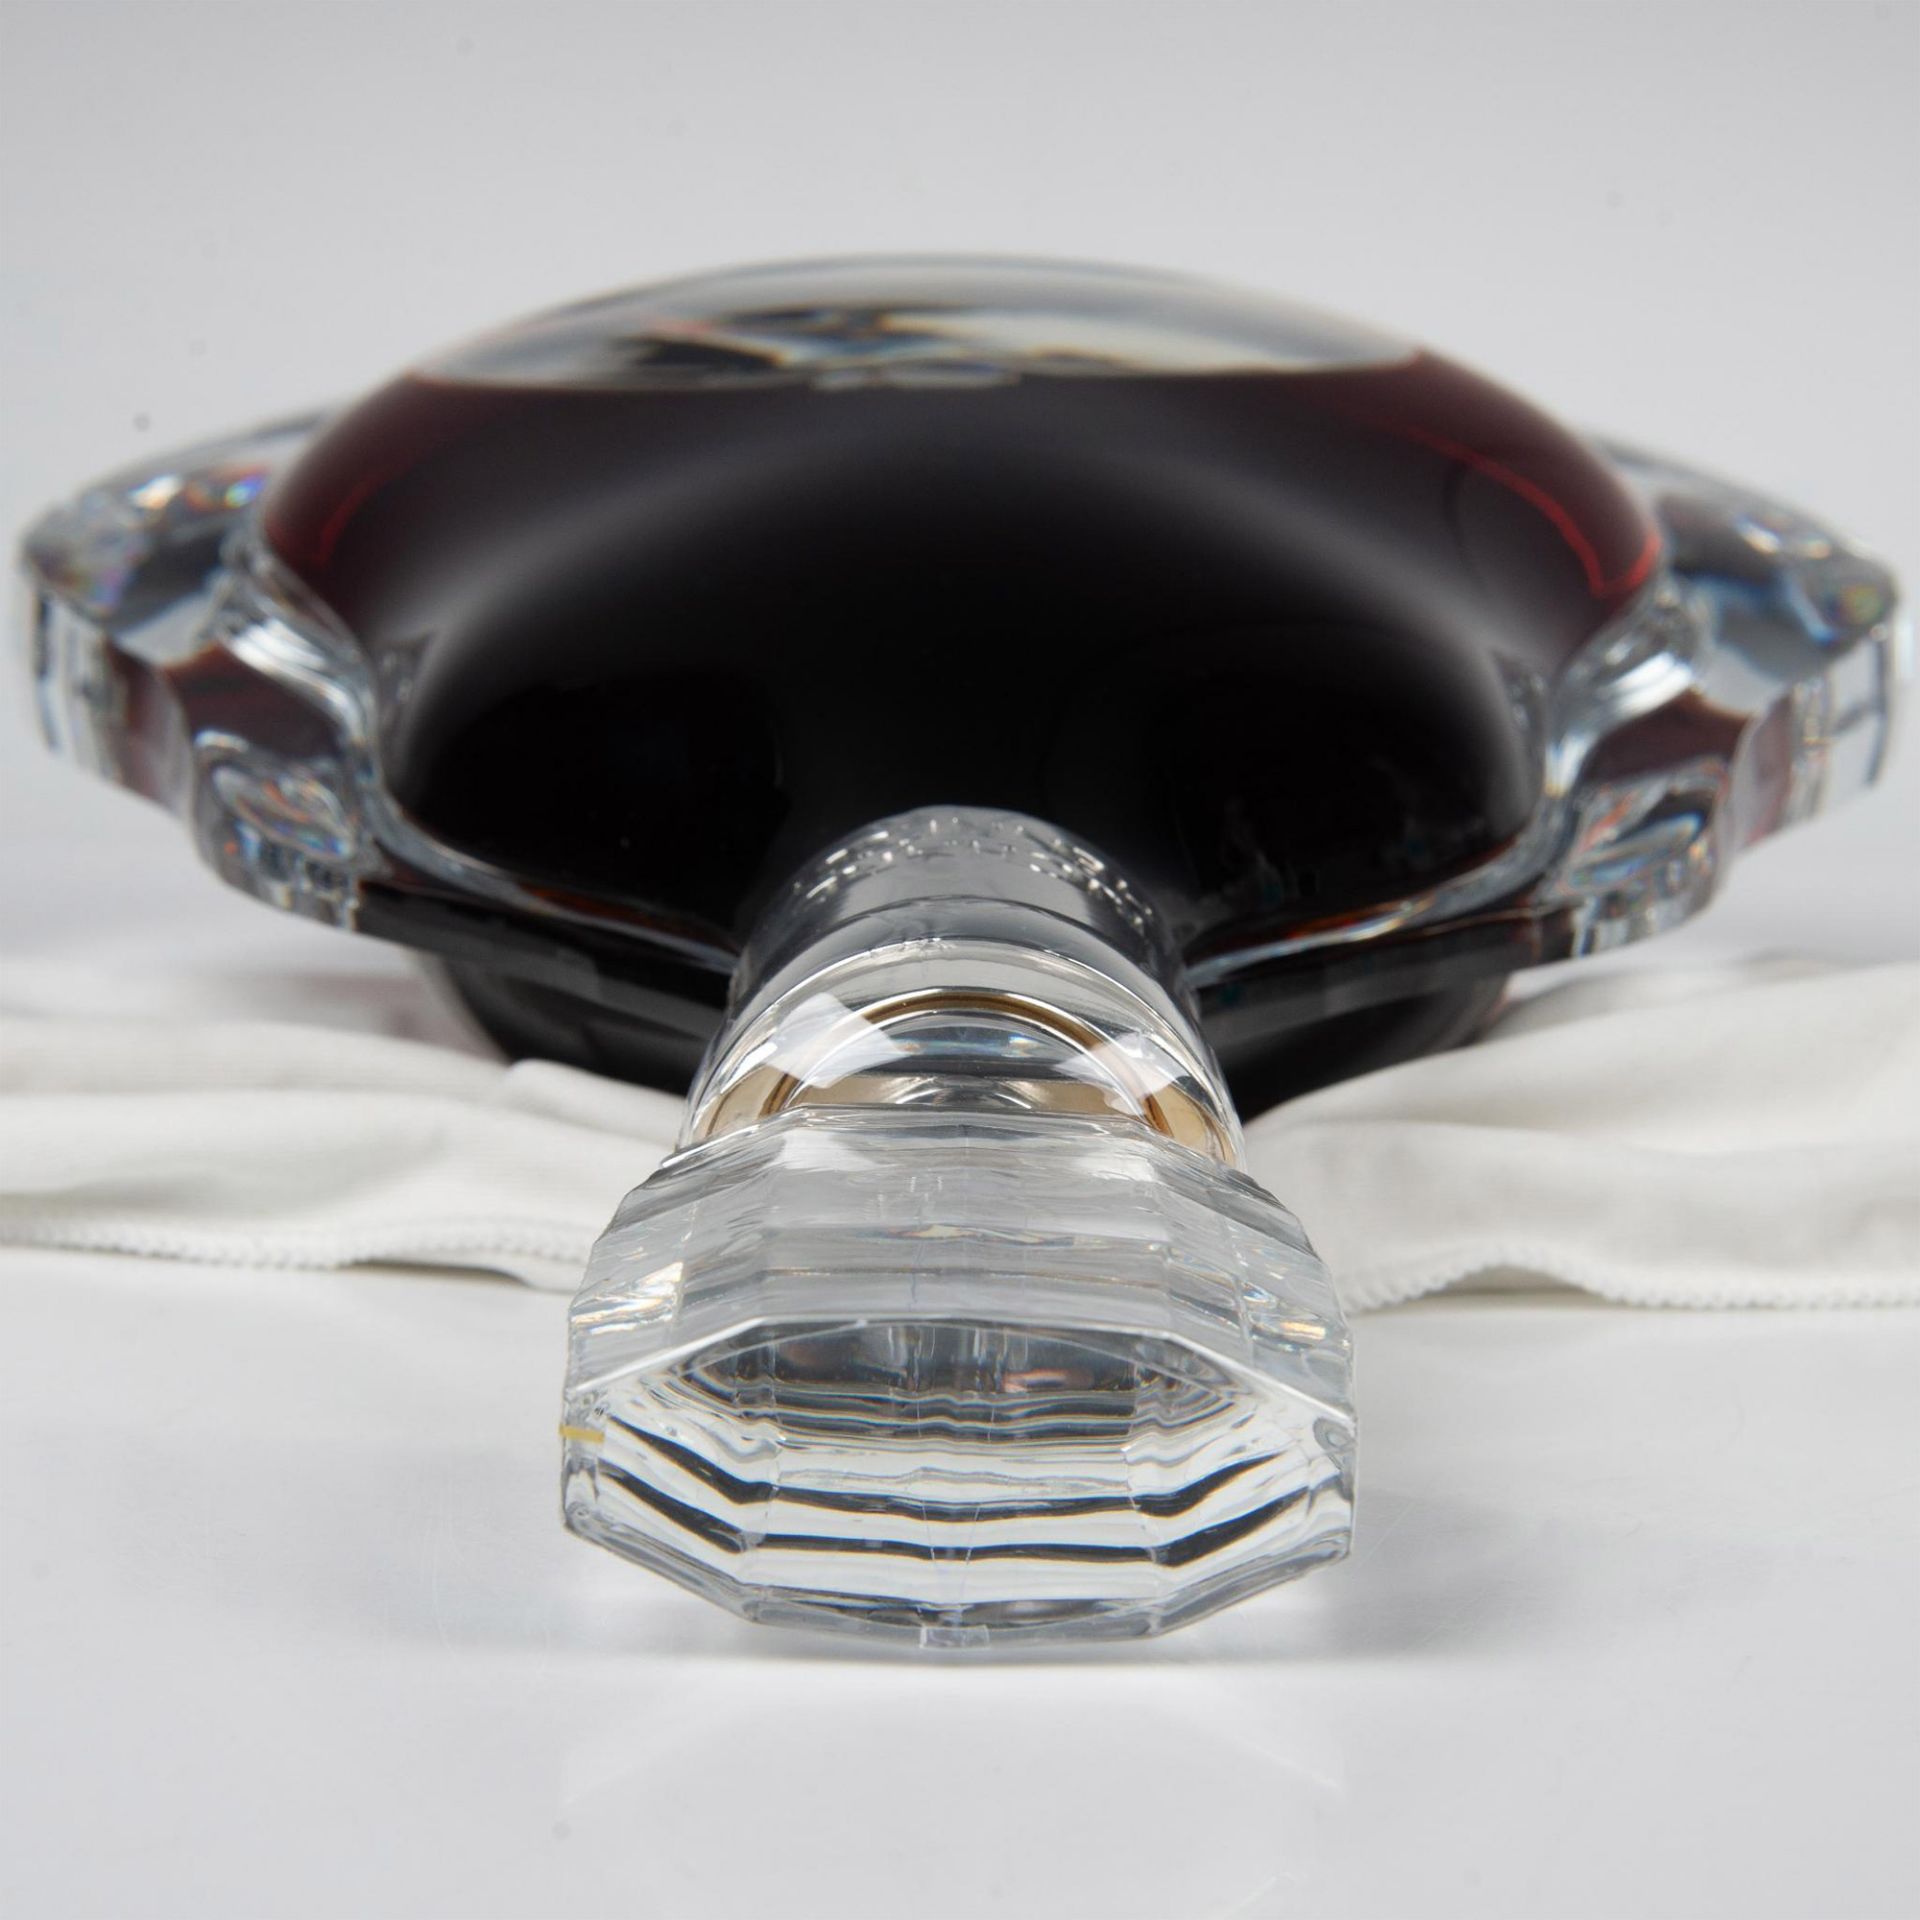 Richard Hennessy & Co. Cognac, Baccarat Crystal - Image 11 of 19